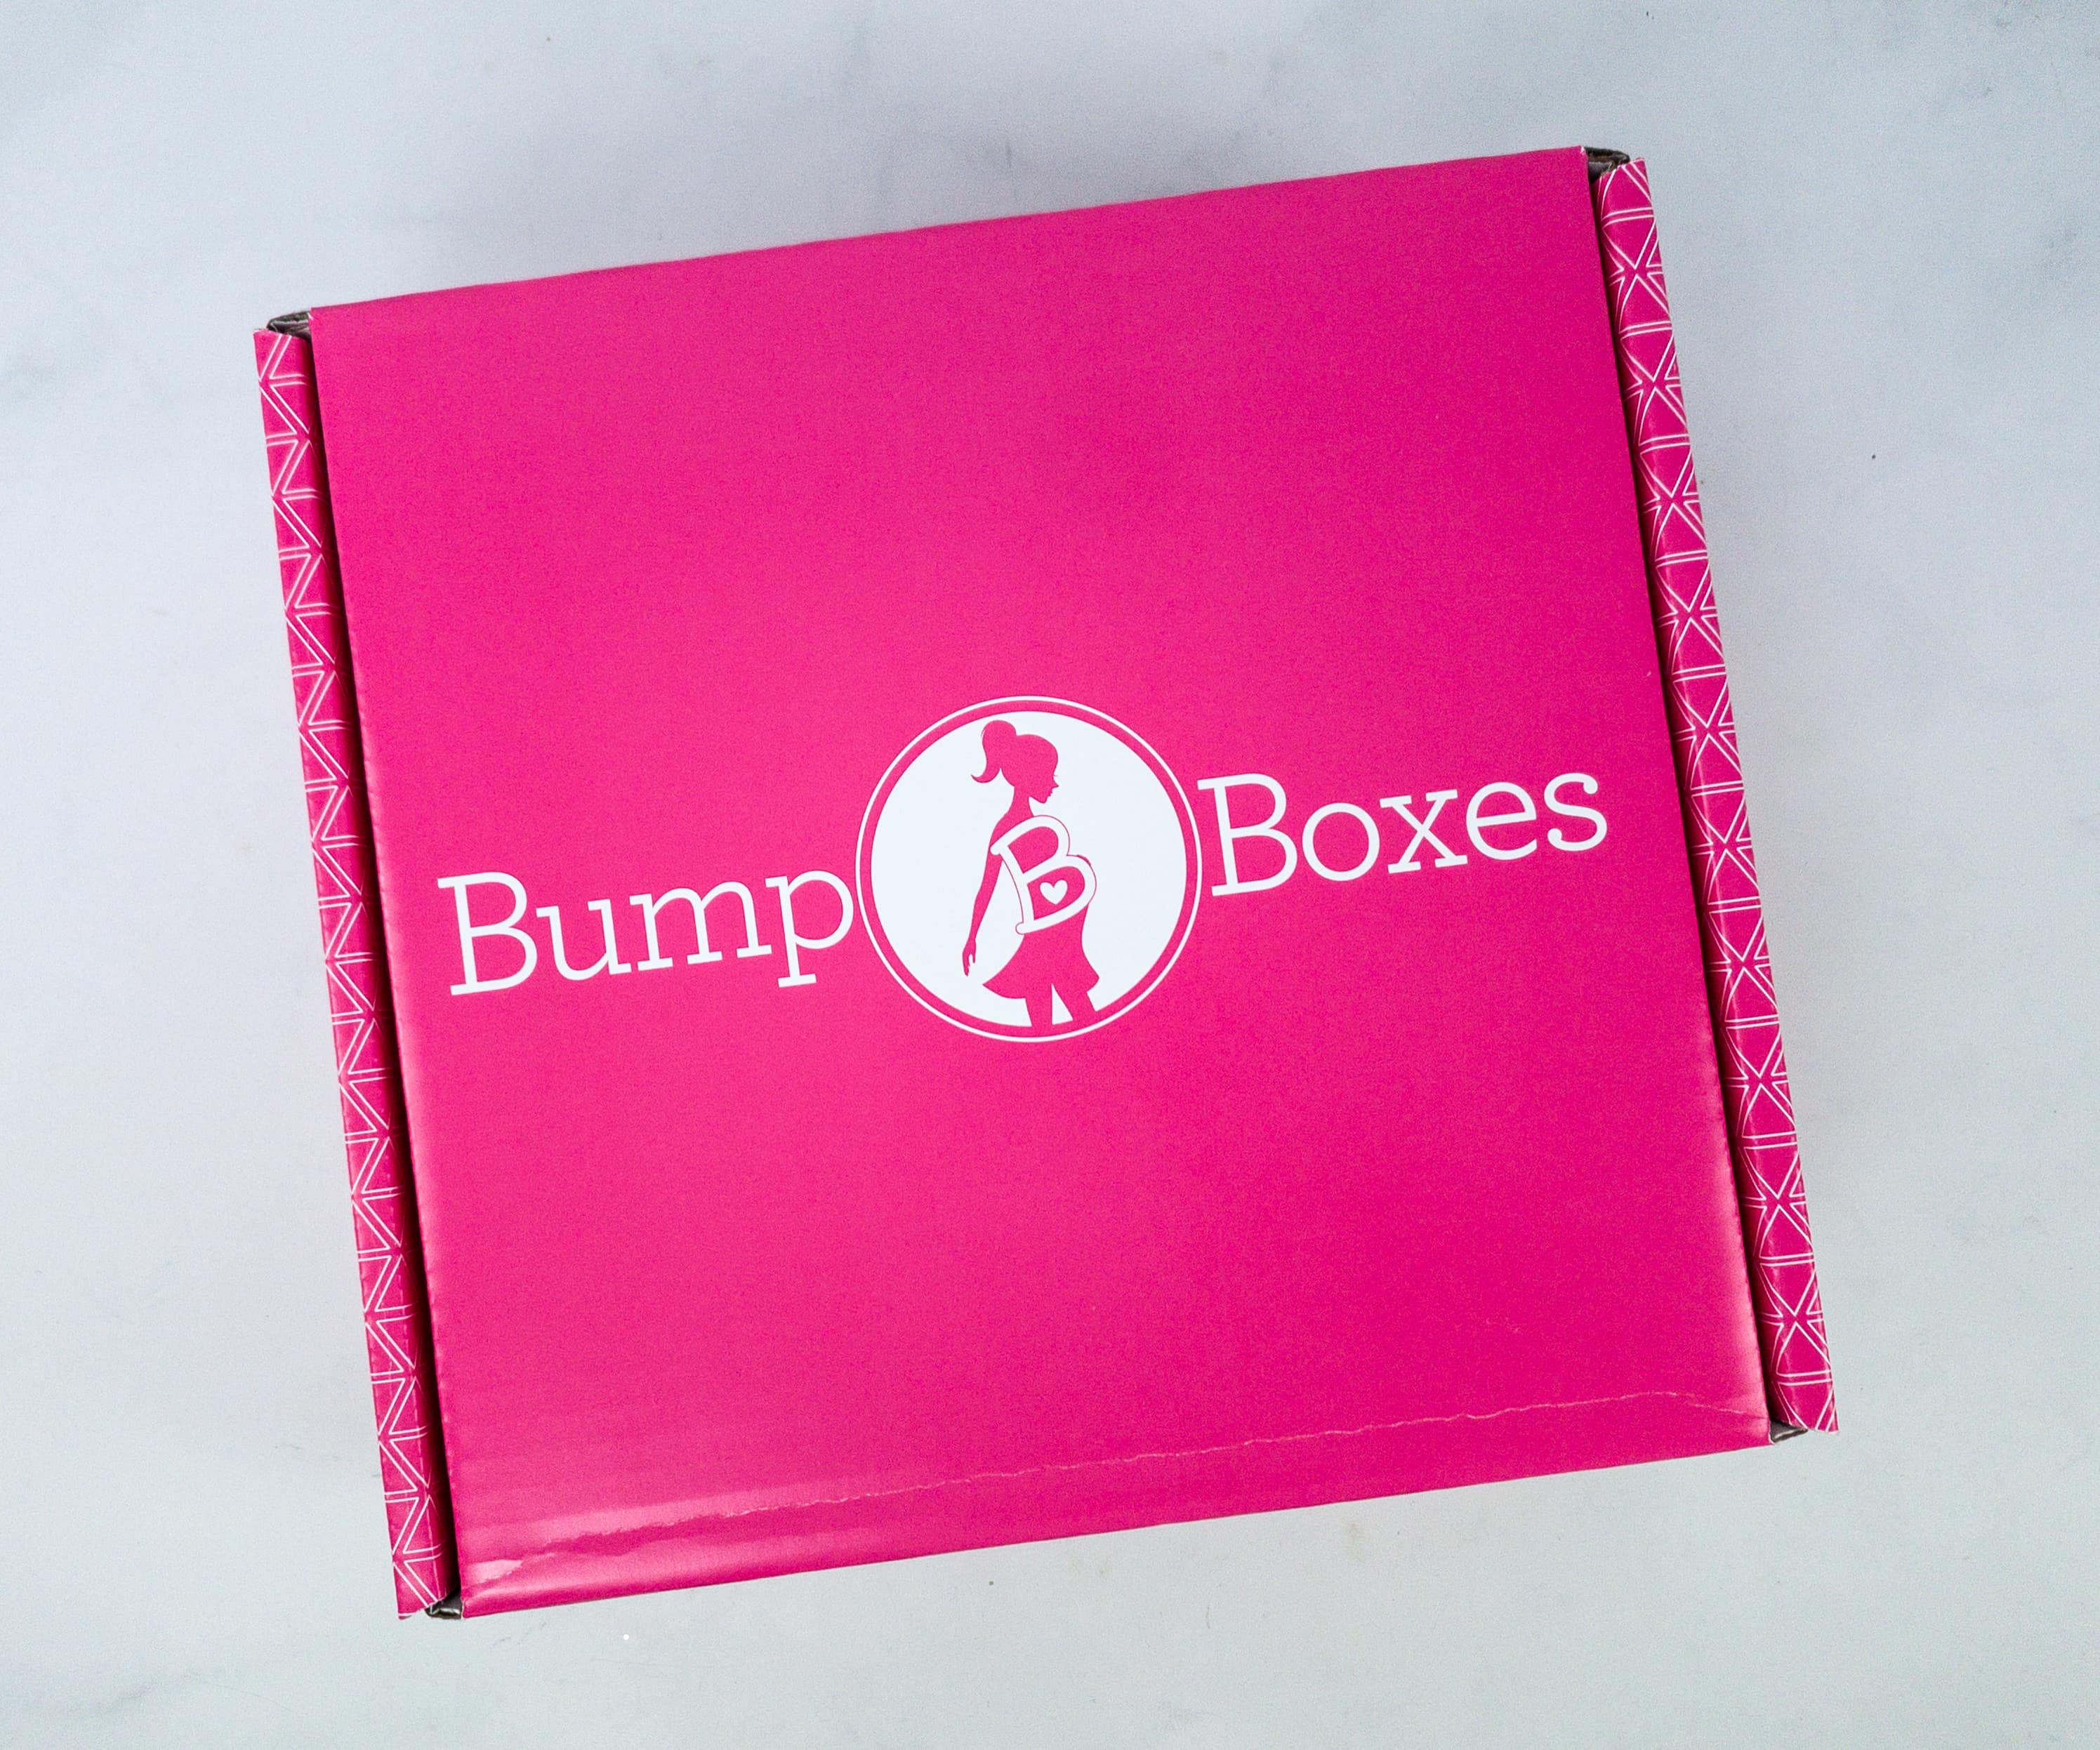 Bump Boxes January 2020 Subscription Box Review + Coupon - Hello  Subscription